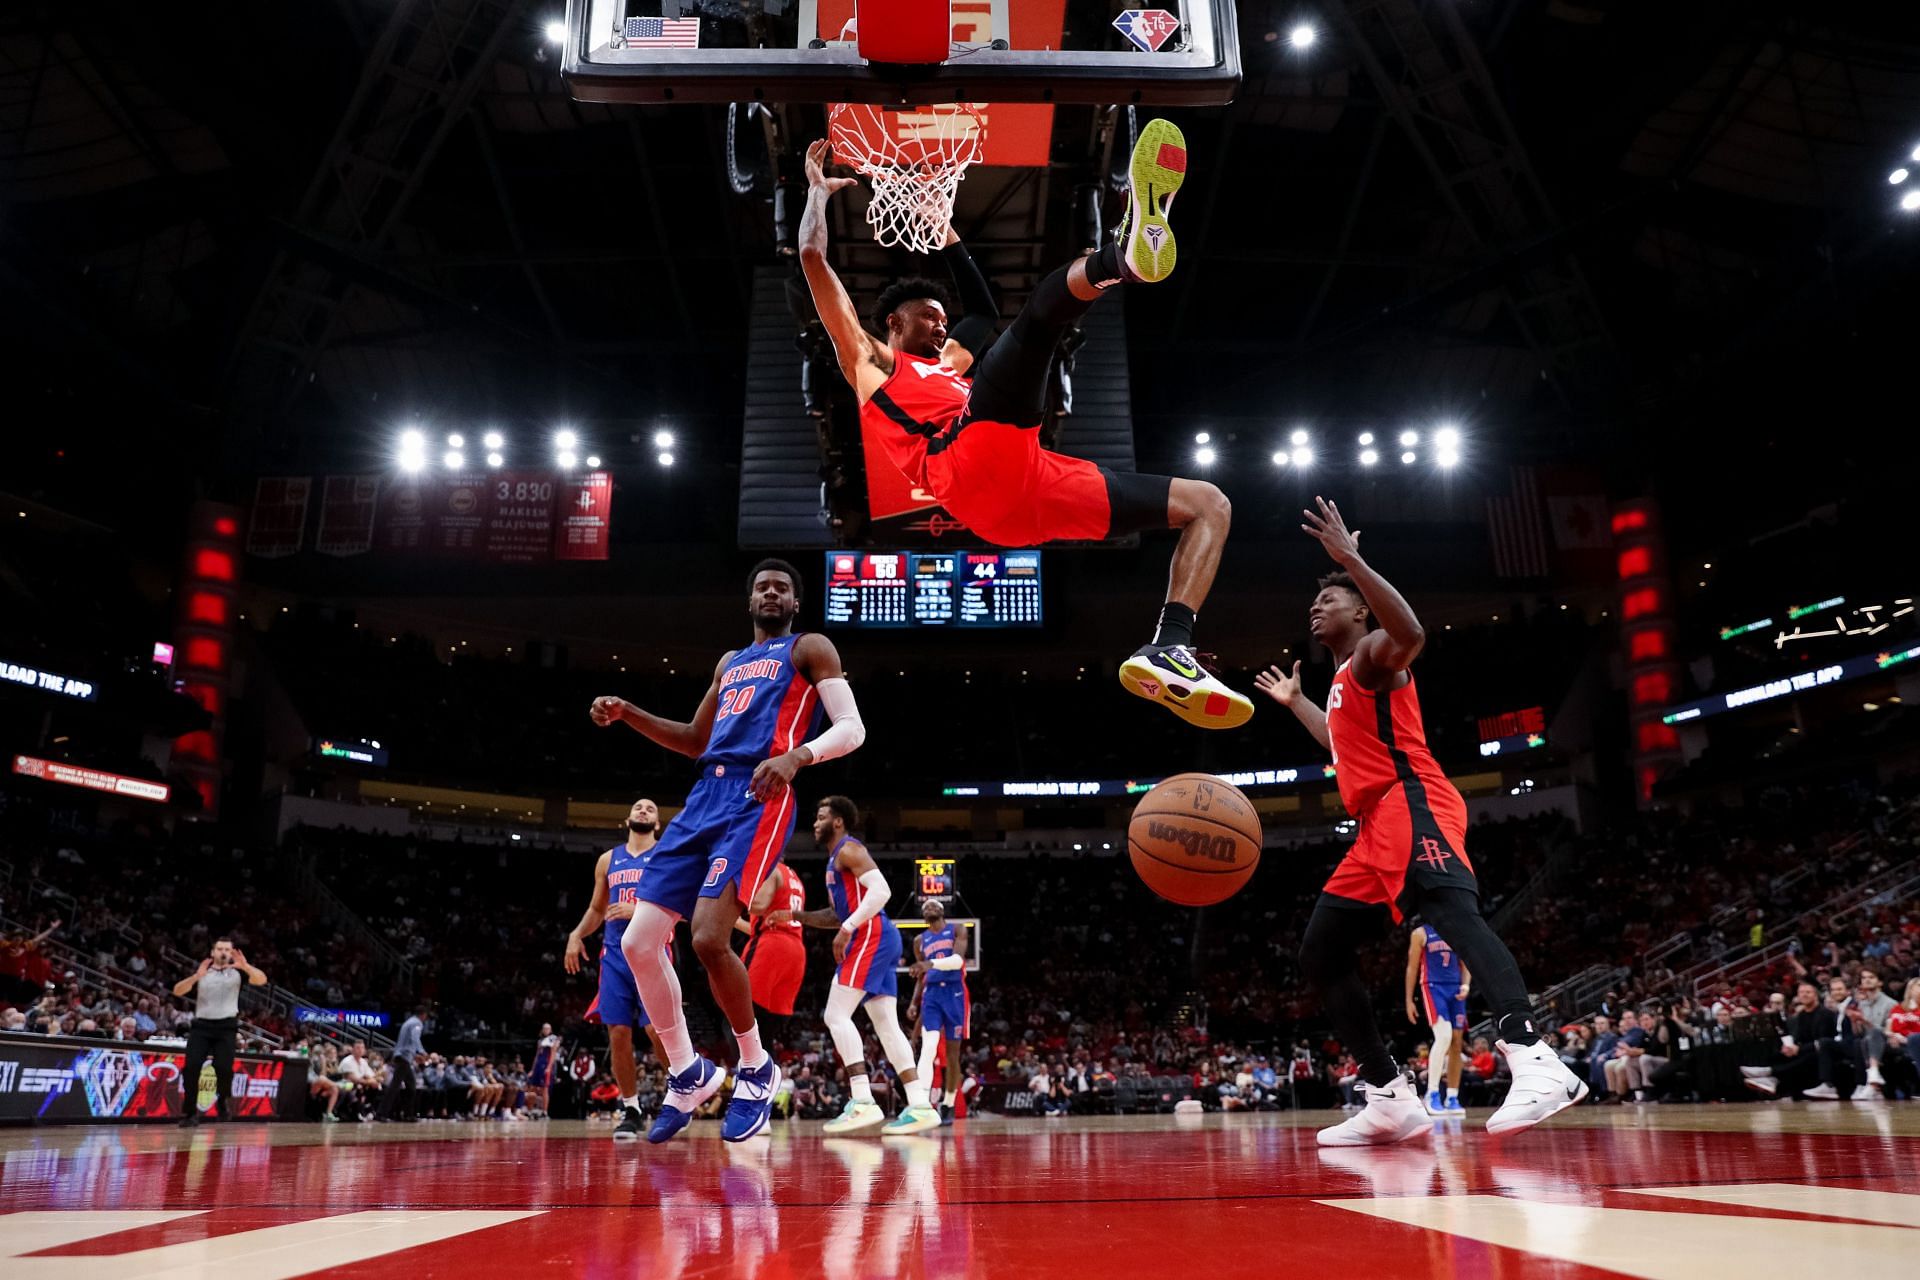 Scenes from the Detroit Pistons v Houston Rockets game